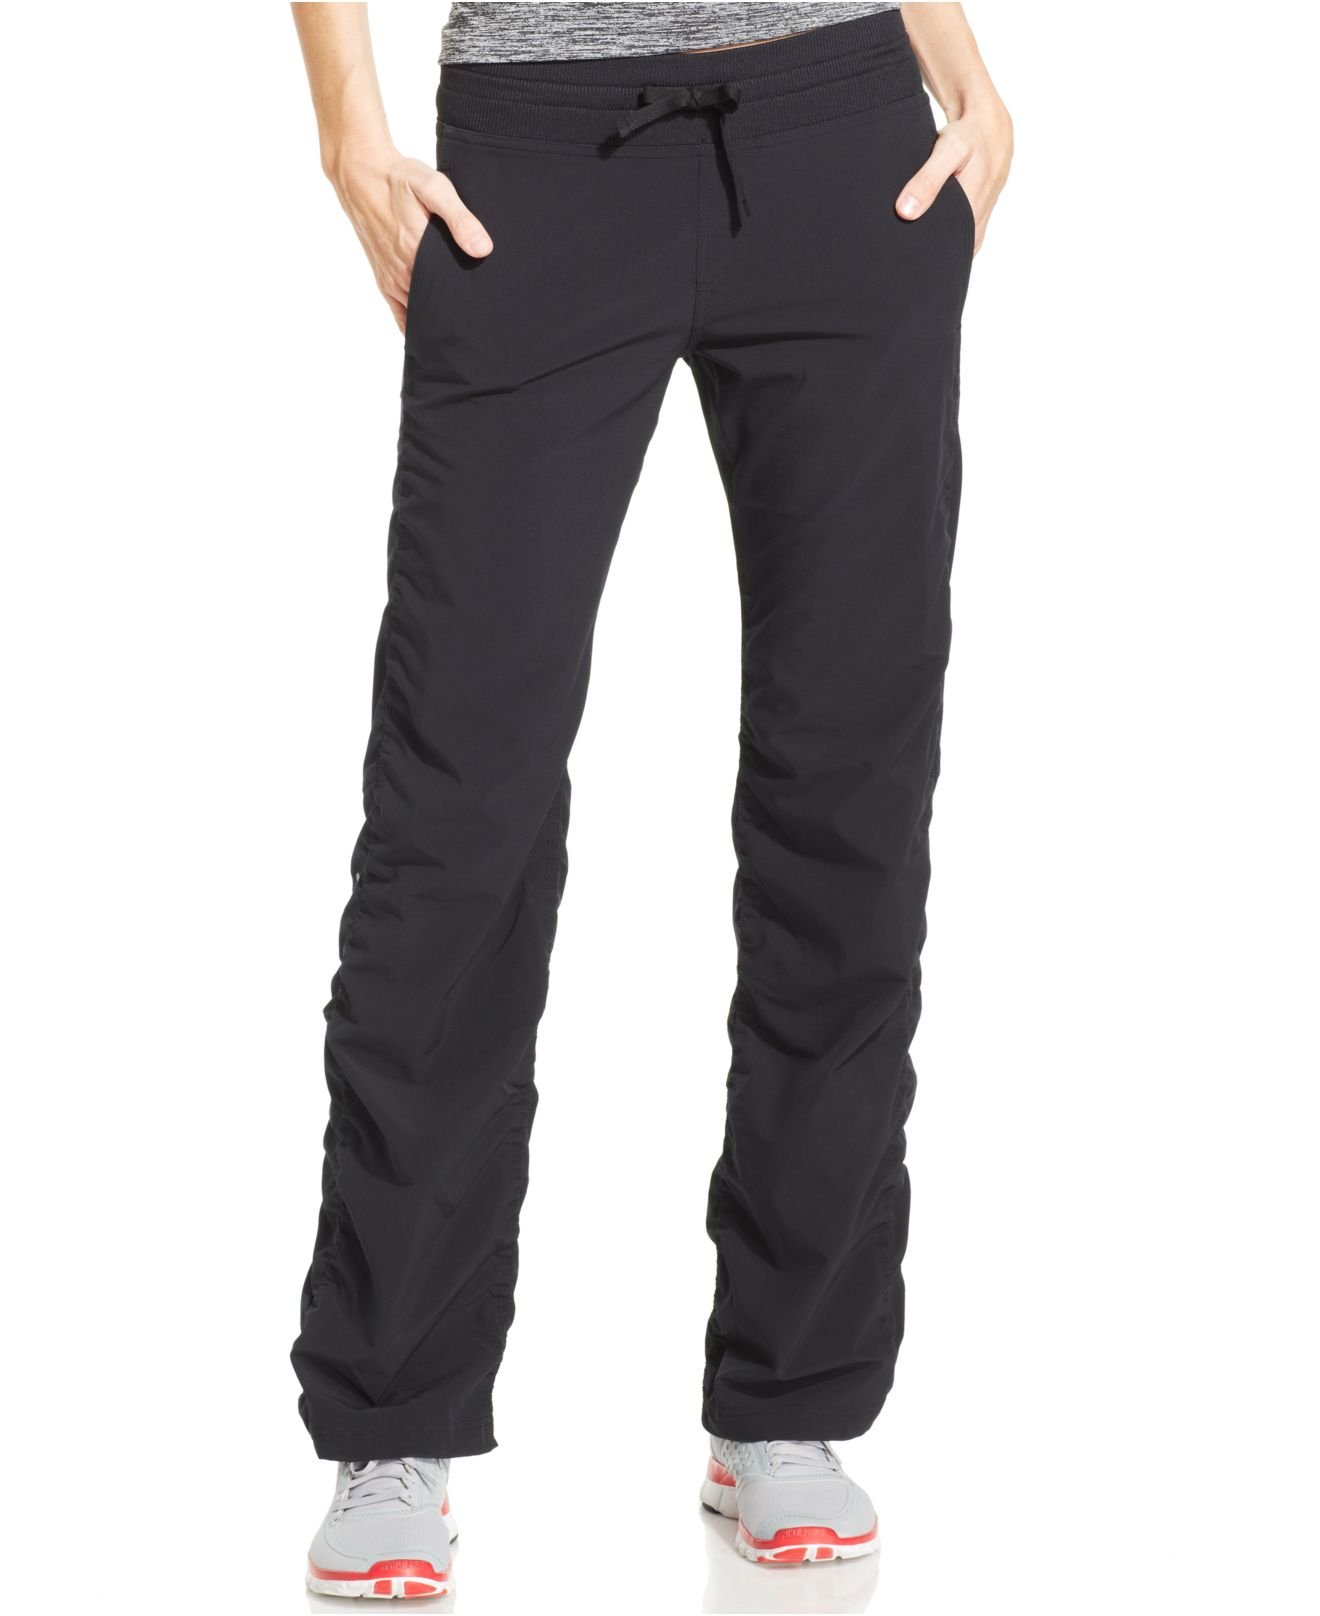 https://cdna.lystit.com/photos/a42b-2015/02/12/under-armour-black-icon-straight-leg-ruched-active-product-1-27814130-0-950820008-normal.jpeg